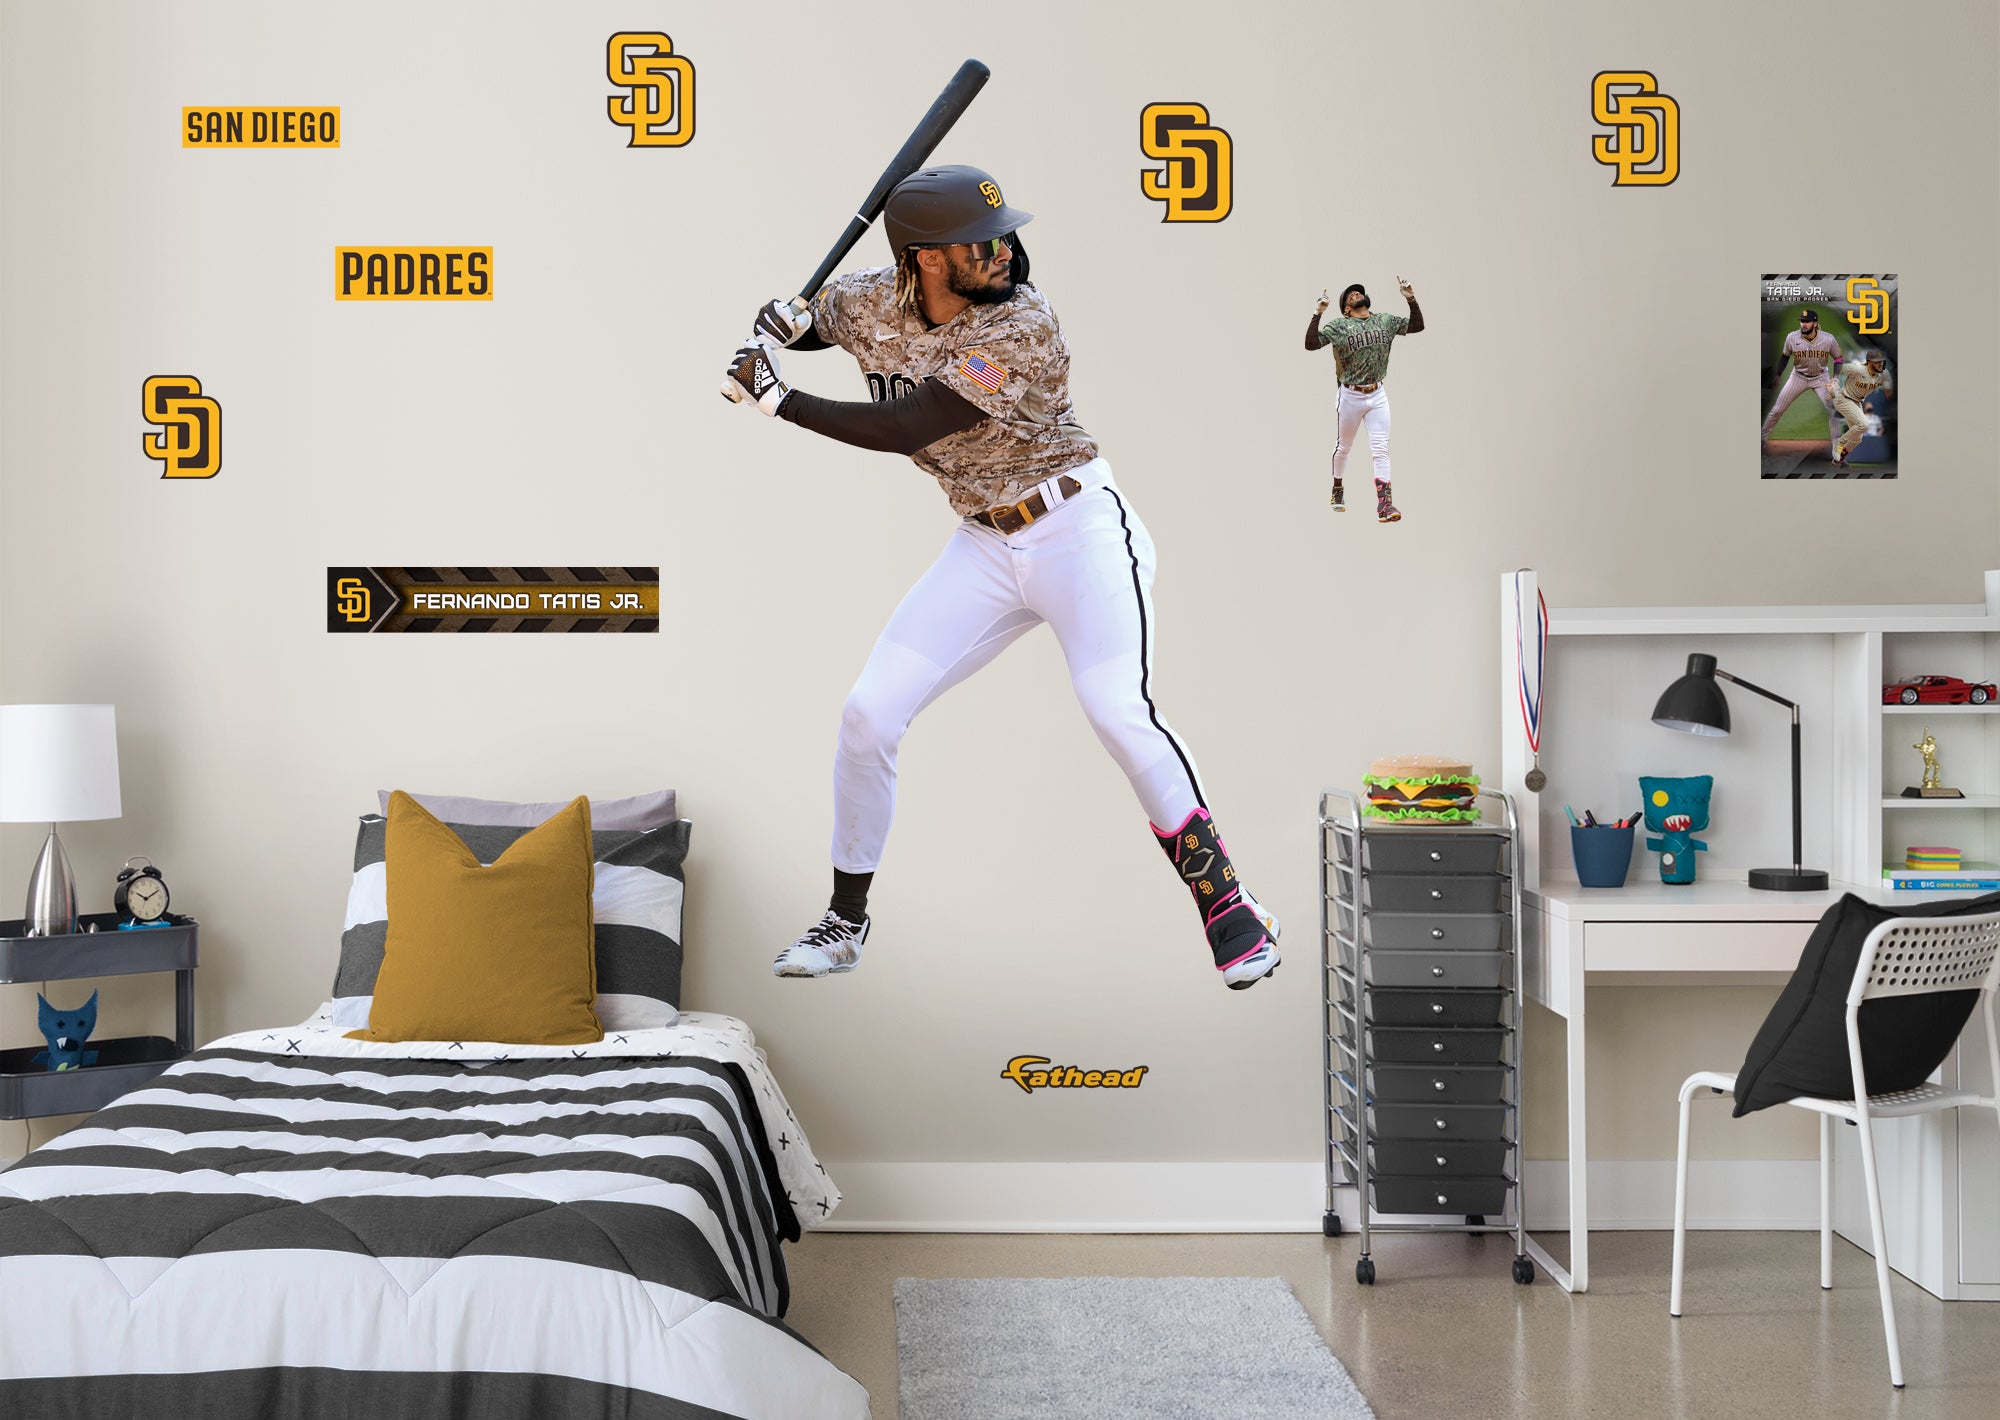 San Diego Padres: Fernando Tatis Jr. 2021 Camo - MLB Removable Wall Adhesive Wall Decal Life-Size Athlete +2 Wall Decals 50W x 78H